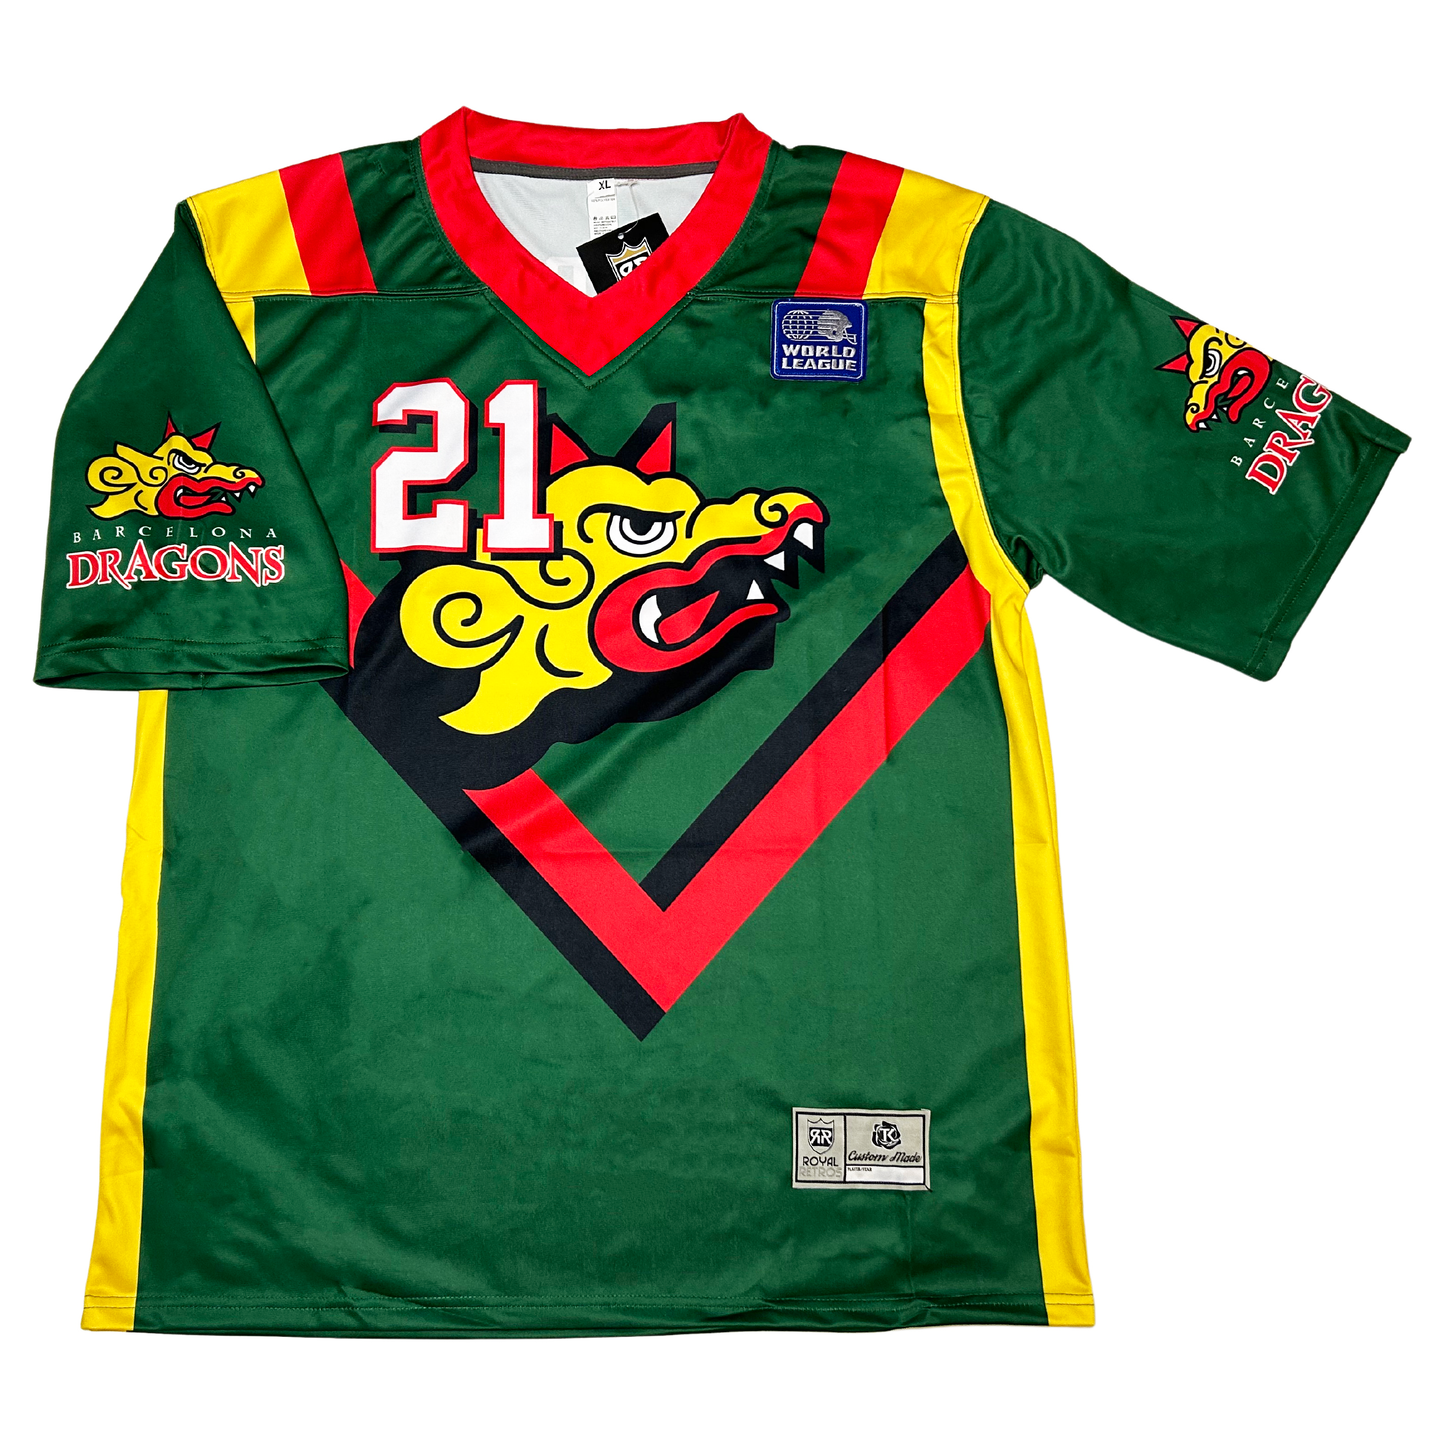 Barcelona Dragons Graphic Jersey